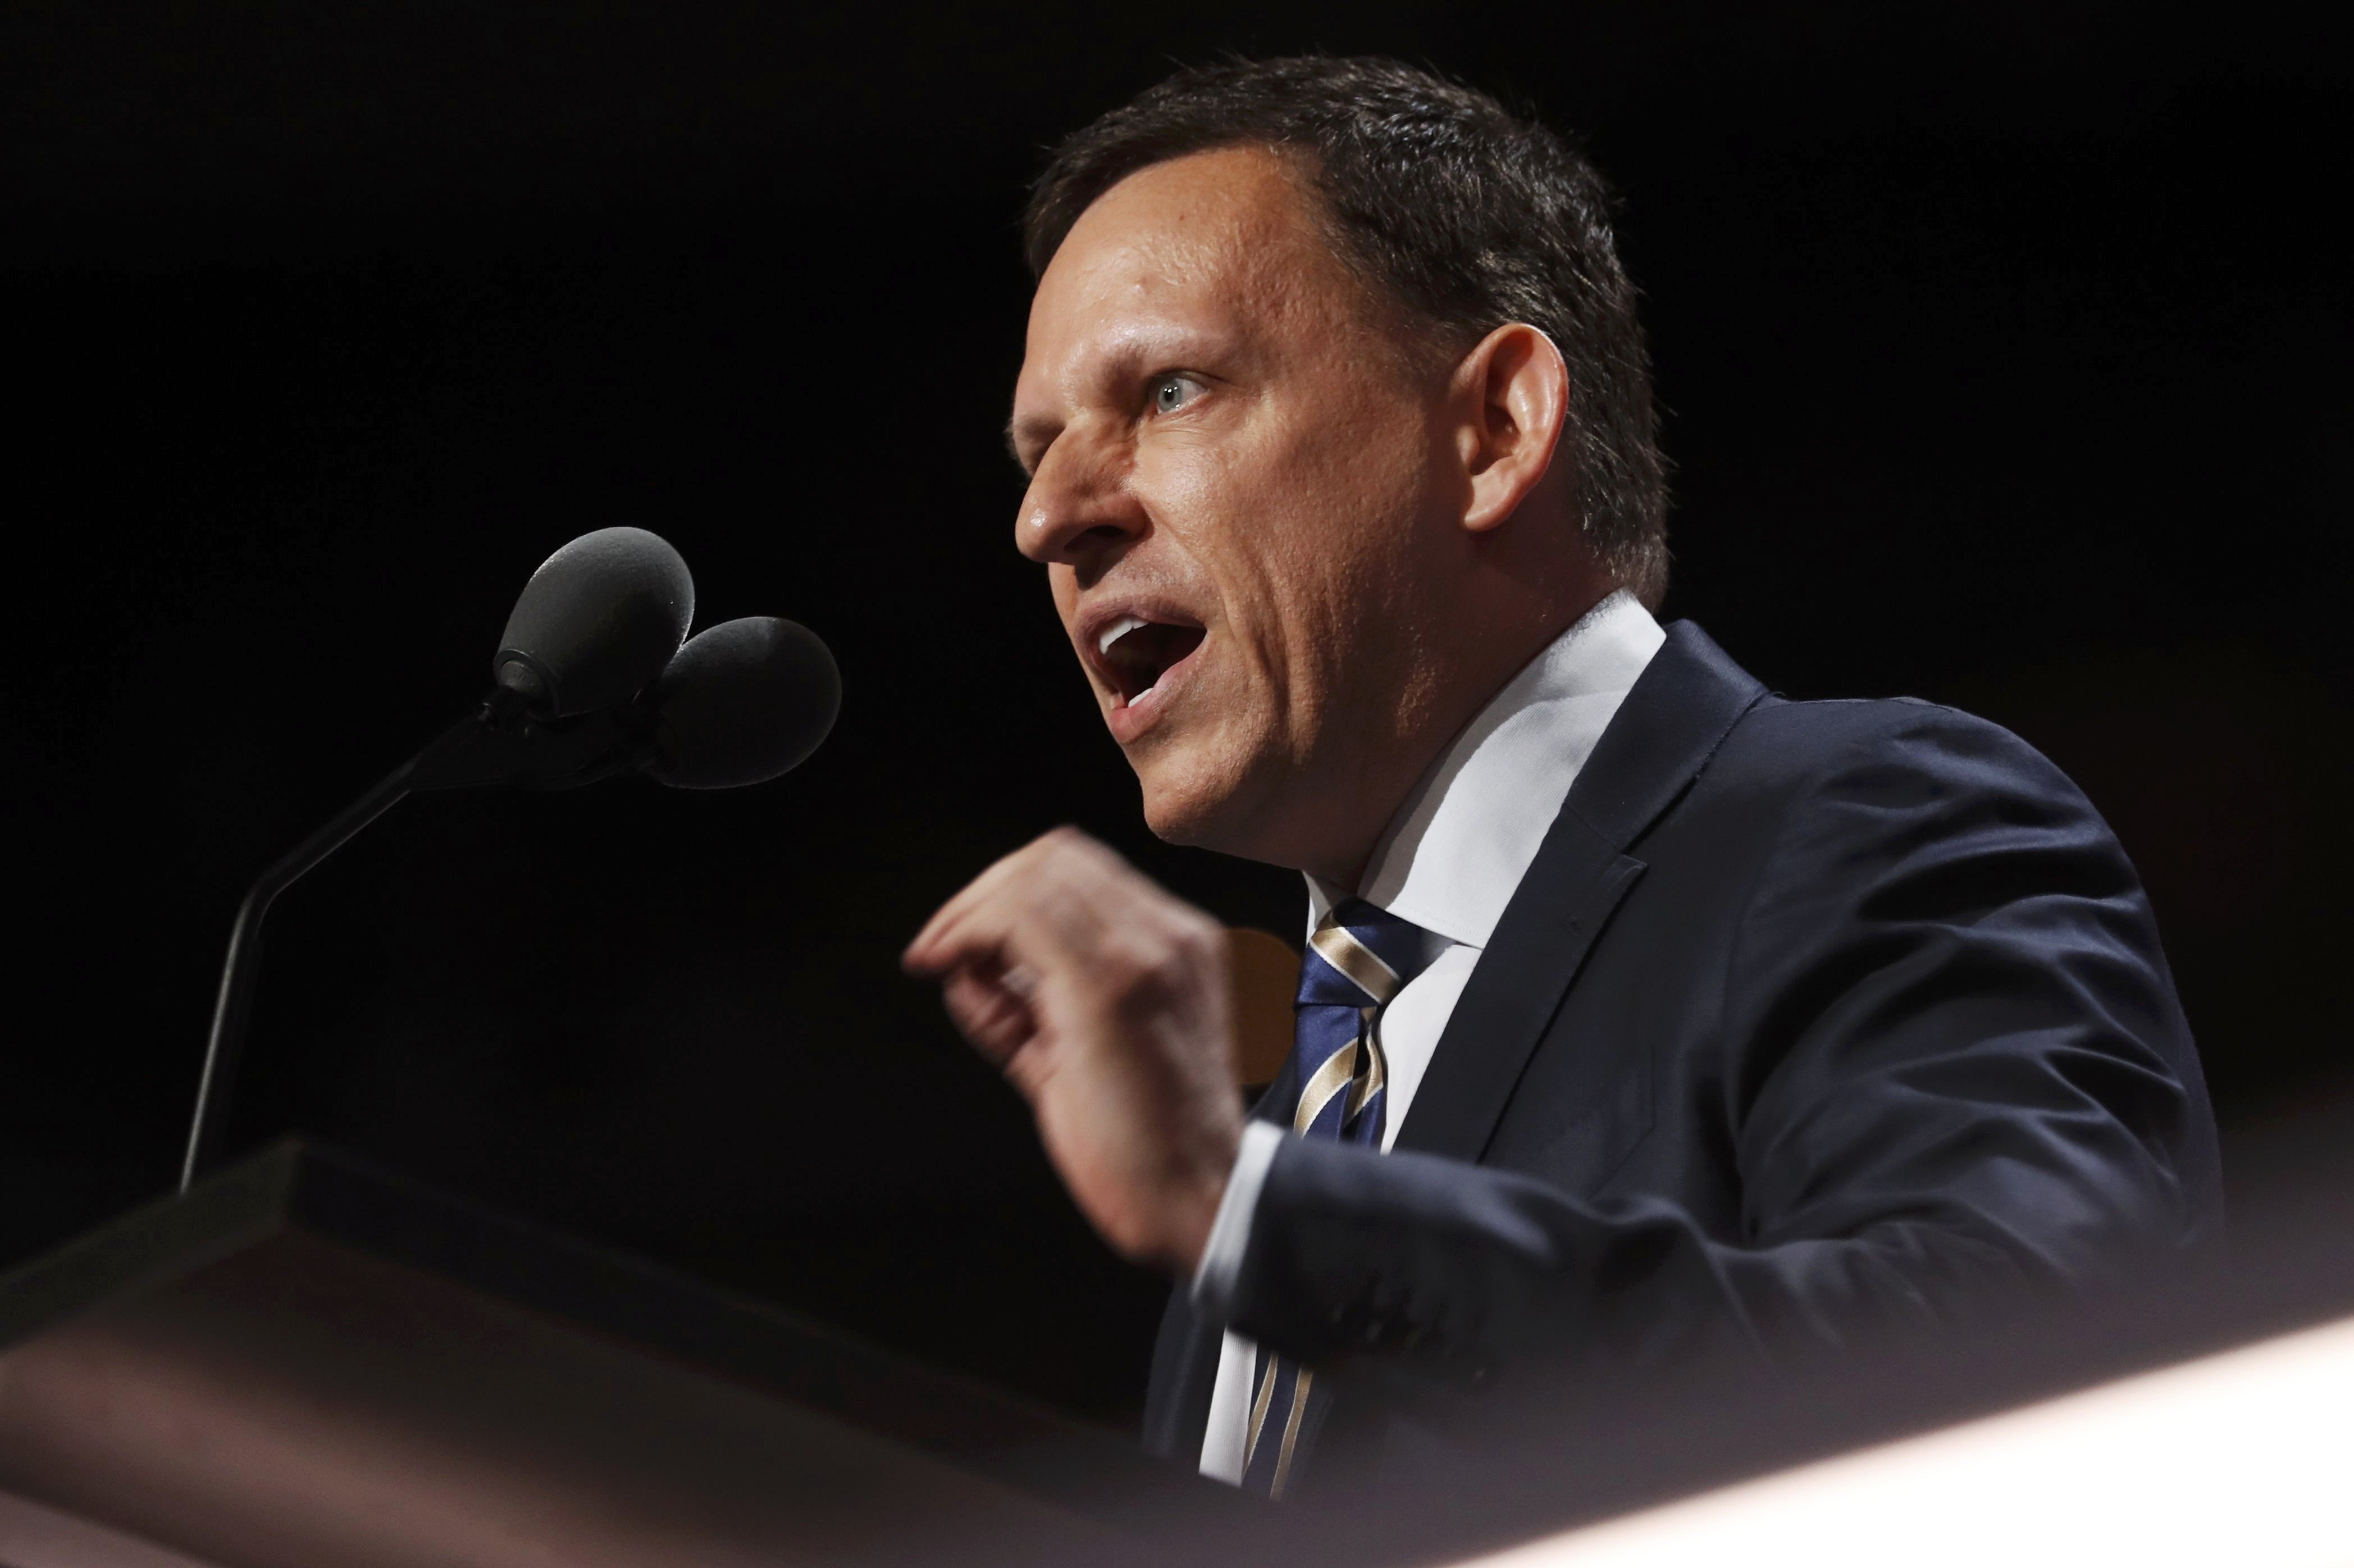 Paypal co-founder Peter Thiel speaks at the Republican National Convention in Cleveland, July 21, 2016. (Jonathan Ernst—Reuters)